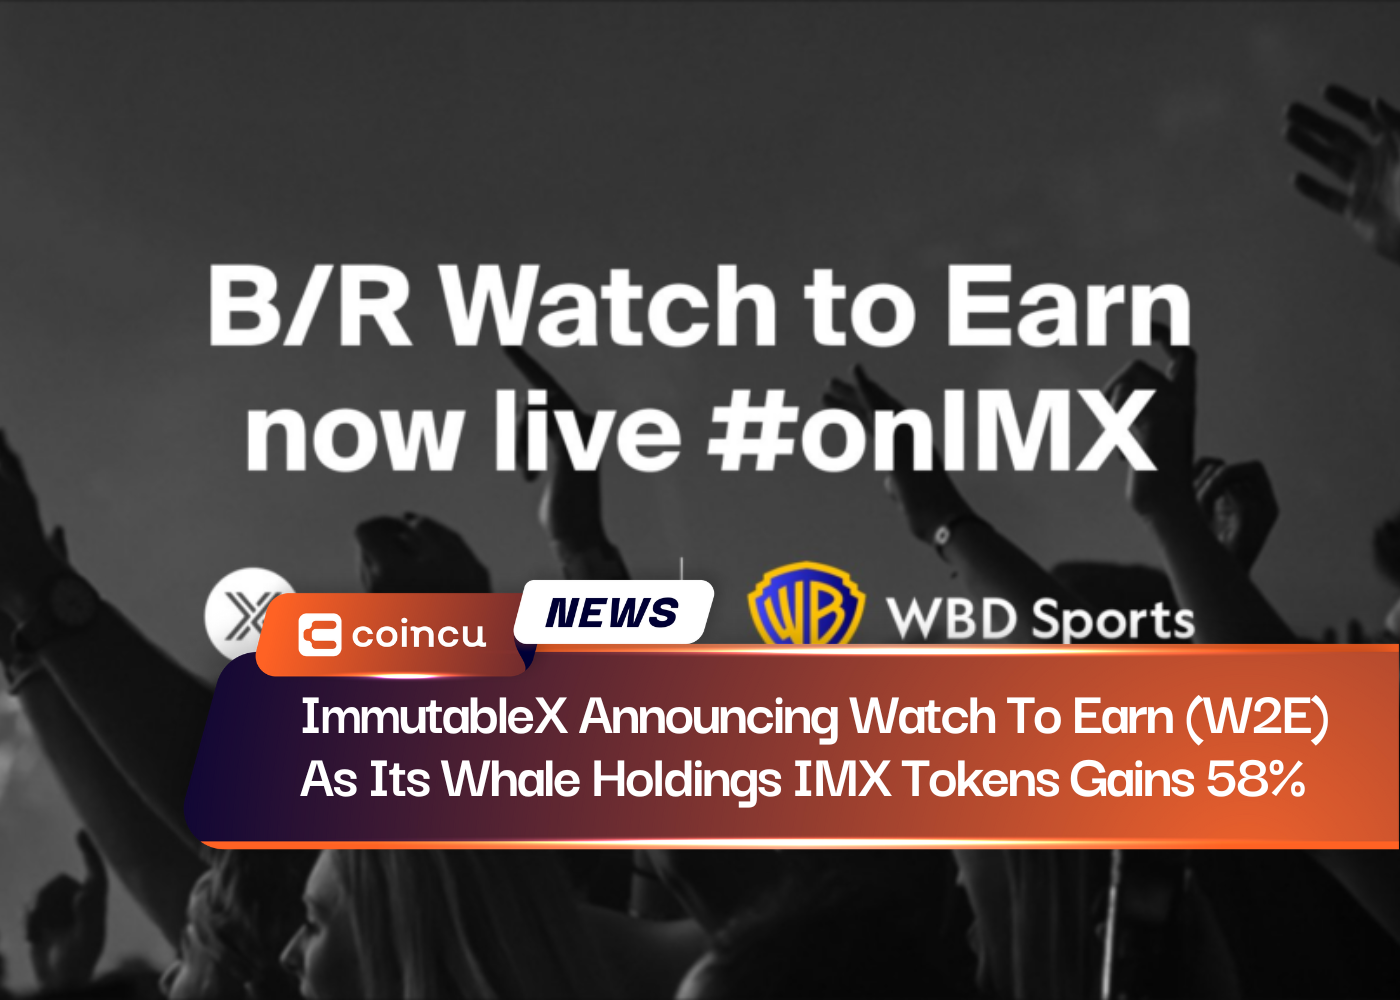 ImmutableX Announcing Watch To Earn (W2E) As Its Whale Holdings IMX Tokens Gains 58%